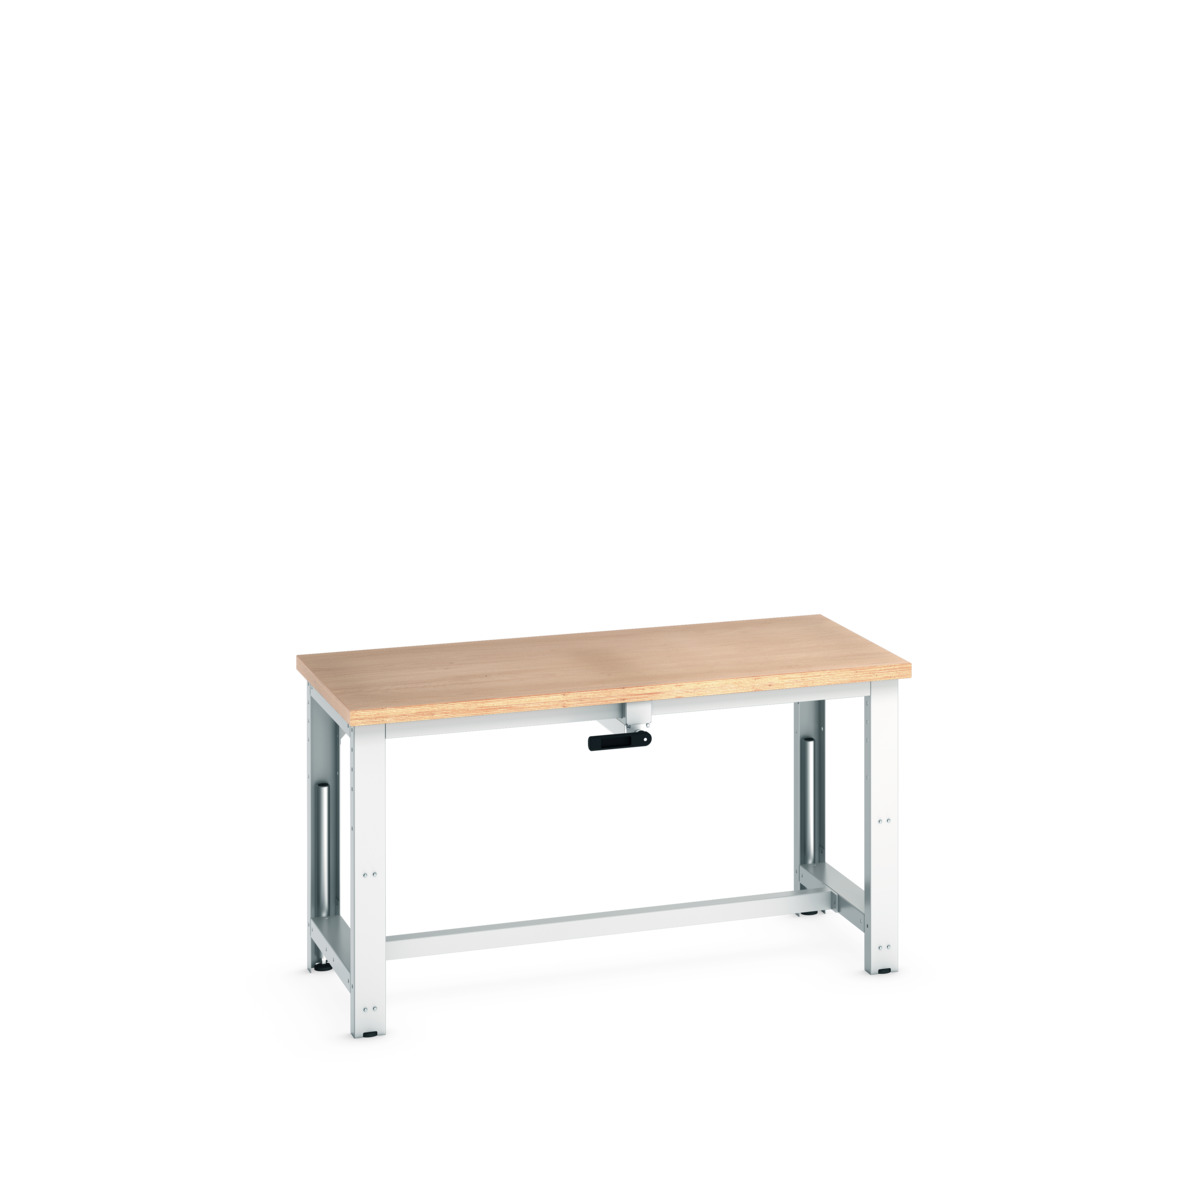 41003574. - cubio stepless adjustable height bench